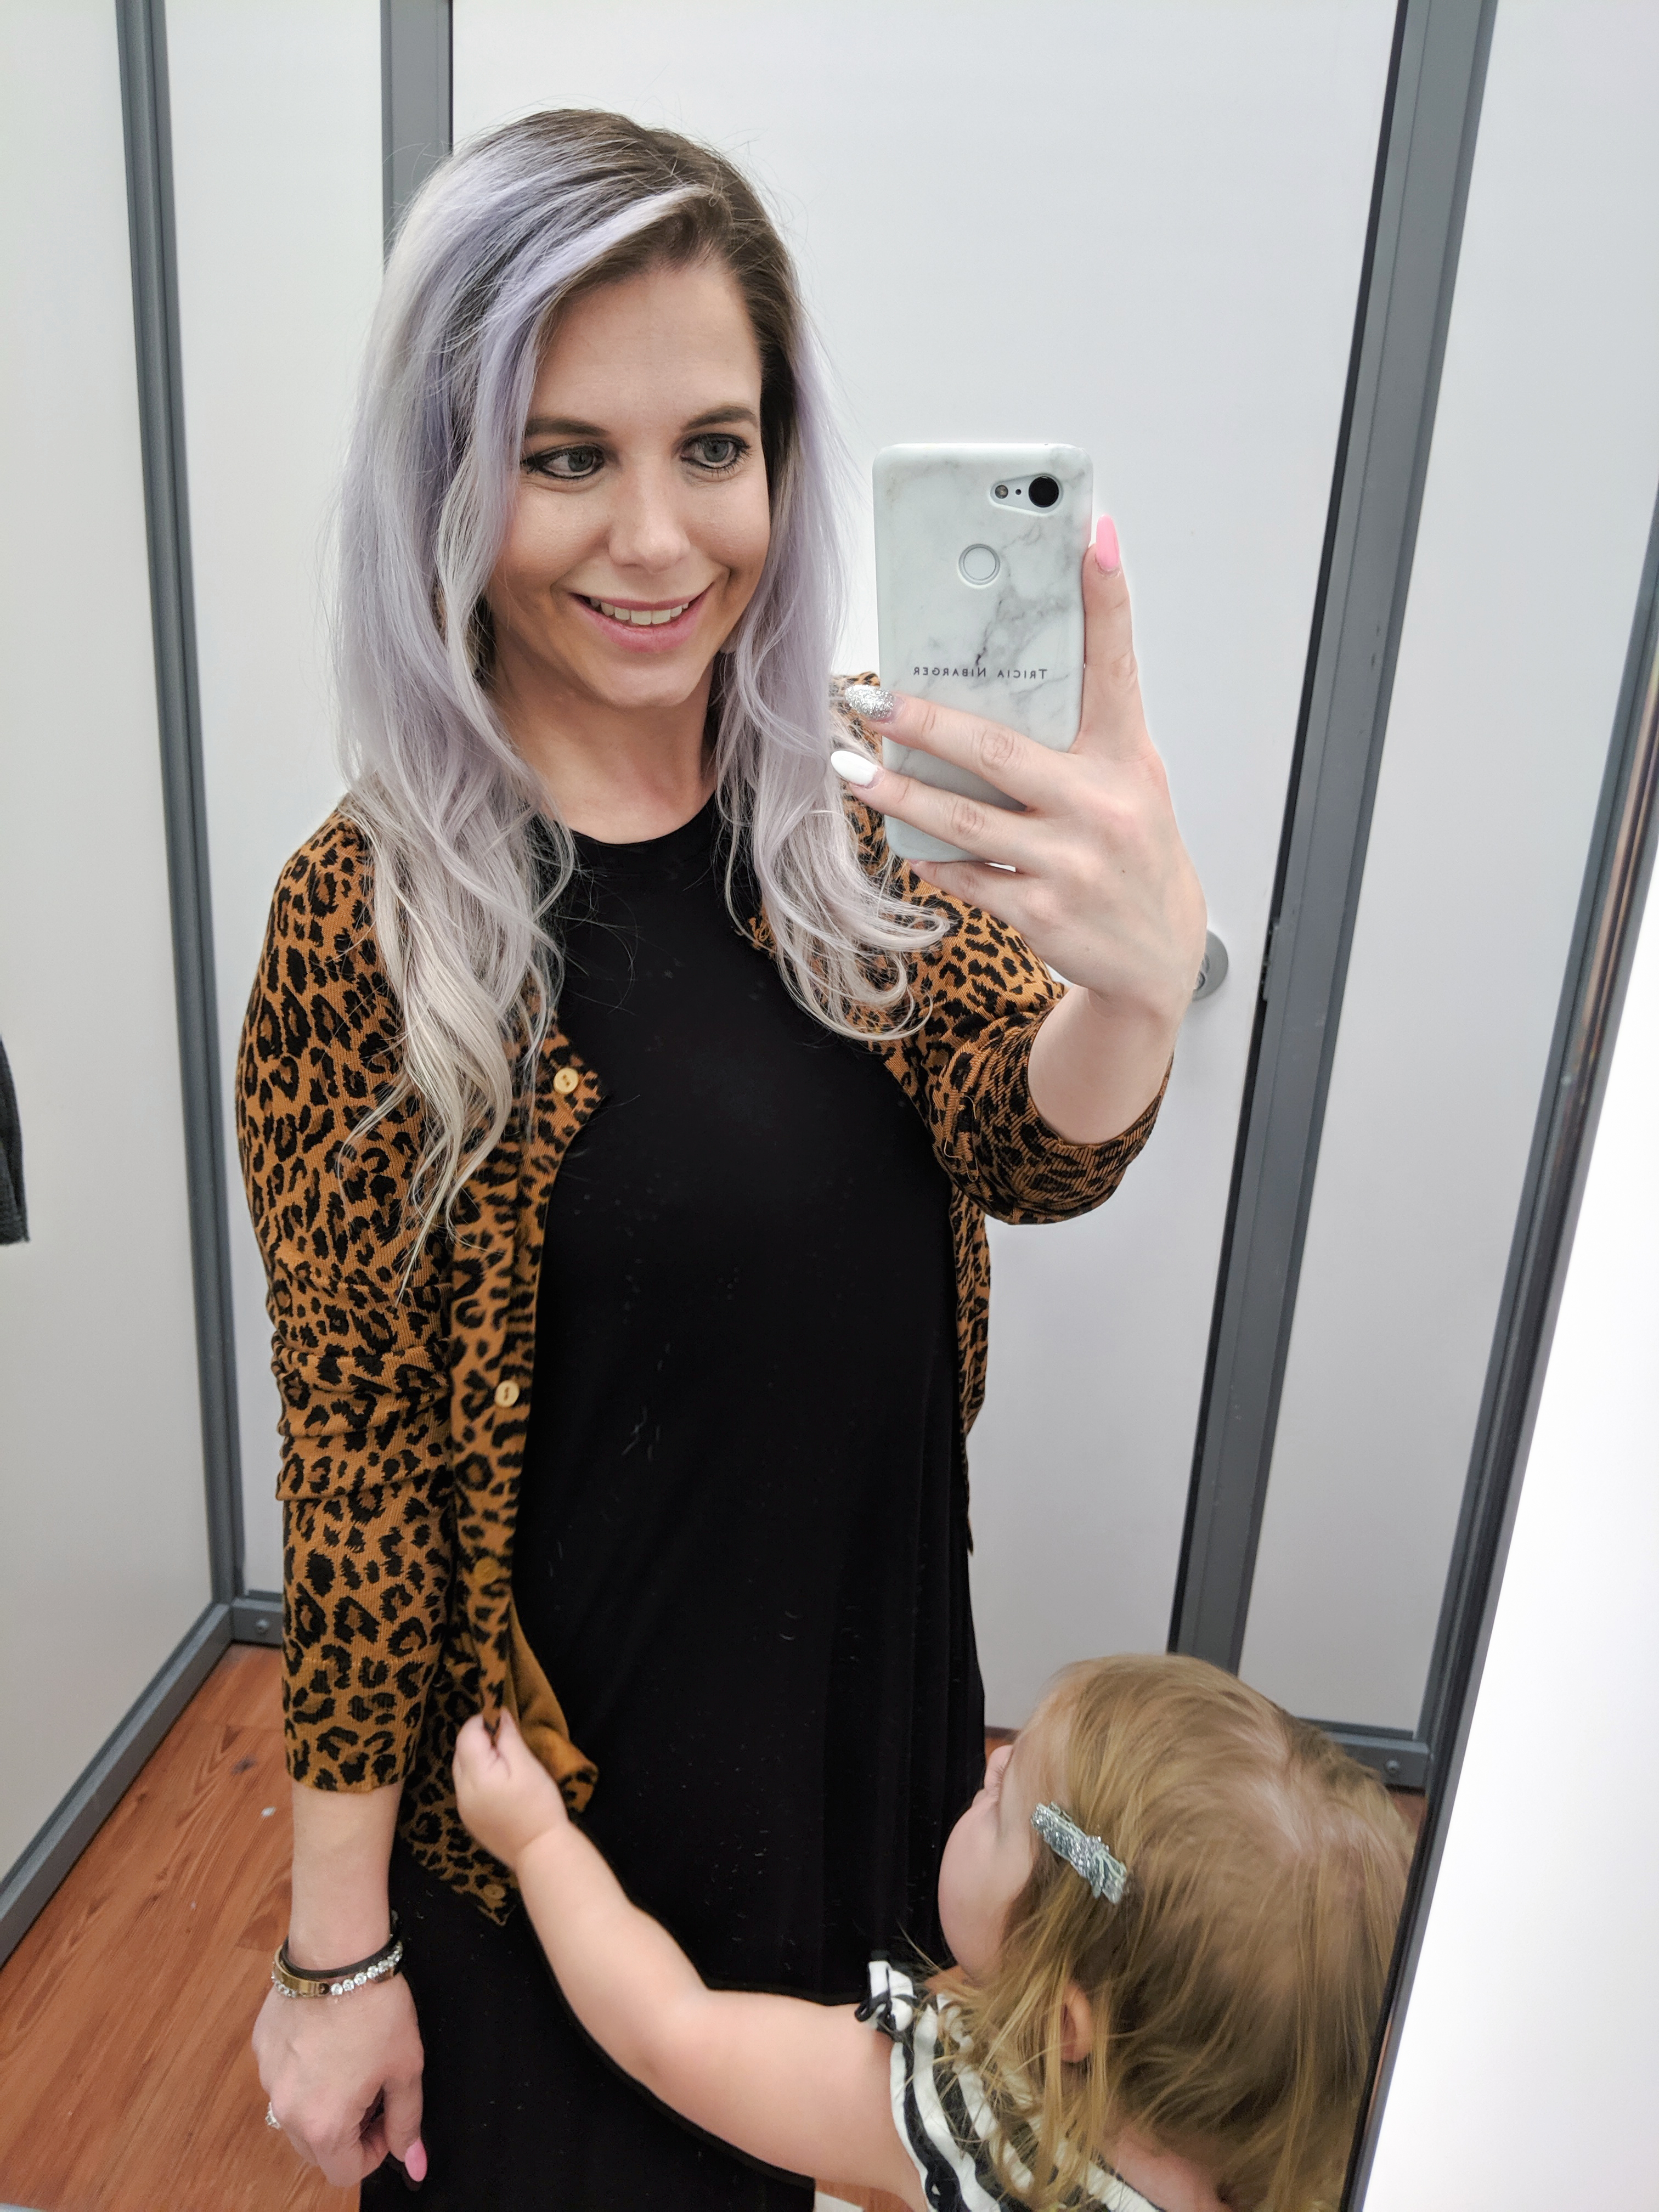 Walmart Try On Haul Fall 2019 - Fall 2019 Walmart finds with fashion blogger Tricia Nibarger of COVET by tricia. Lots of cute finds in this Walmart try on, including designer dupes, leopard print galore, and lots more. #walmart #walmartfashion #tryon #haul 